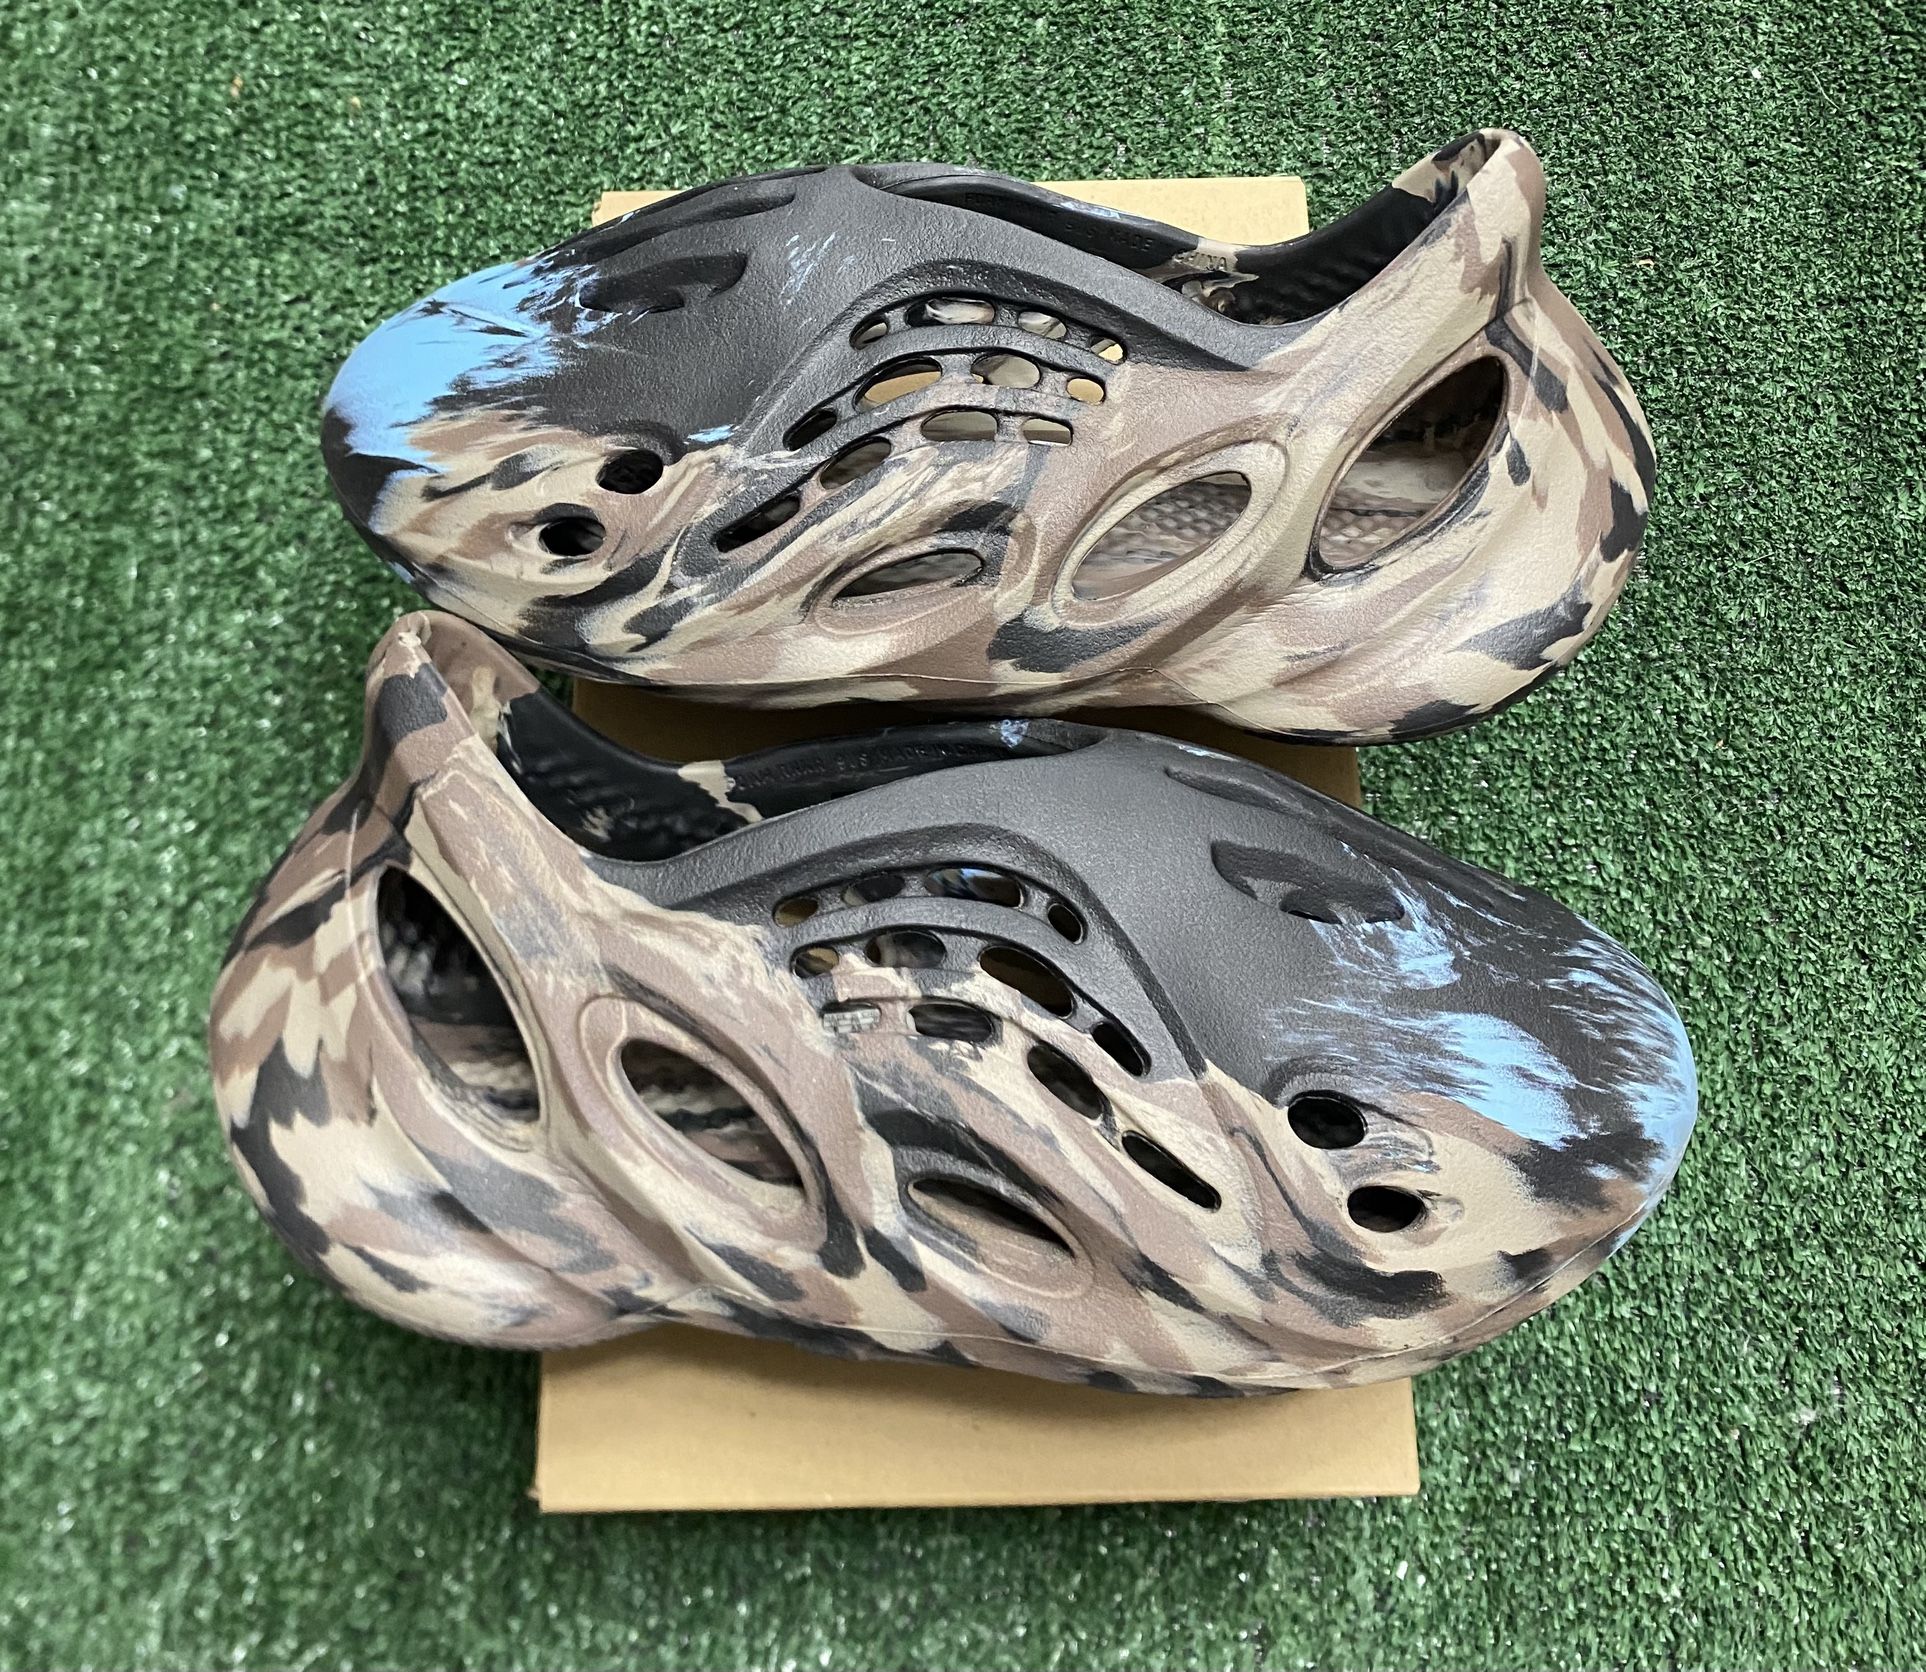 Adidas Yeezy MX Cinder Foam Runner size 9 PADS for Sale in Albuquerque ...